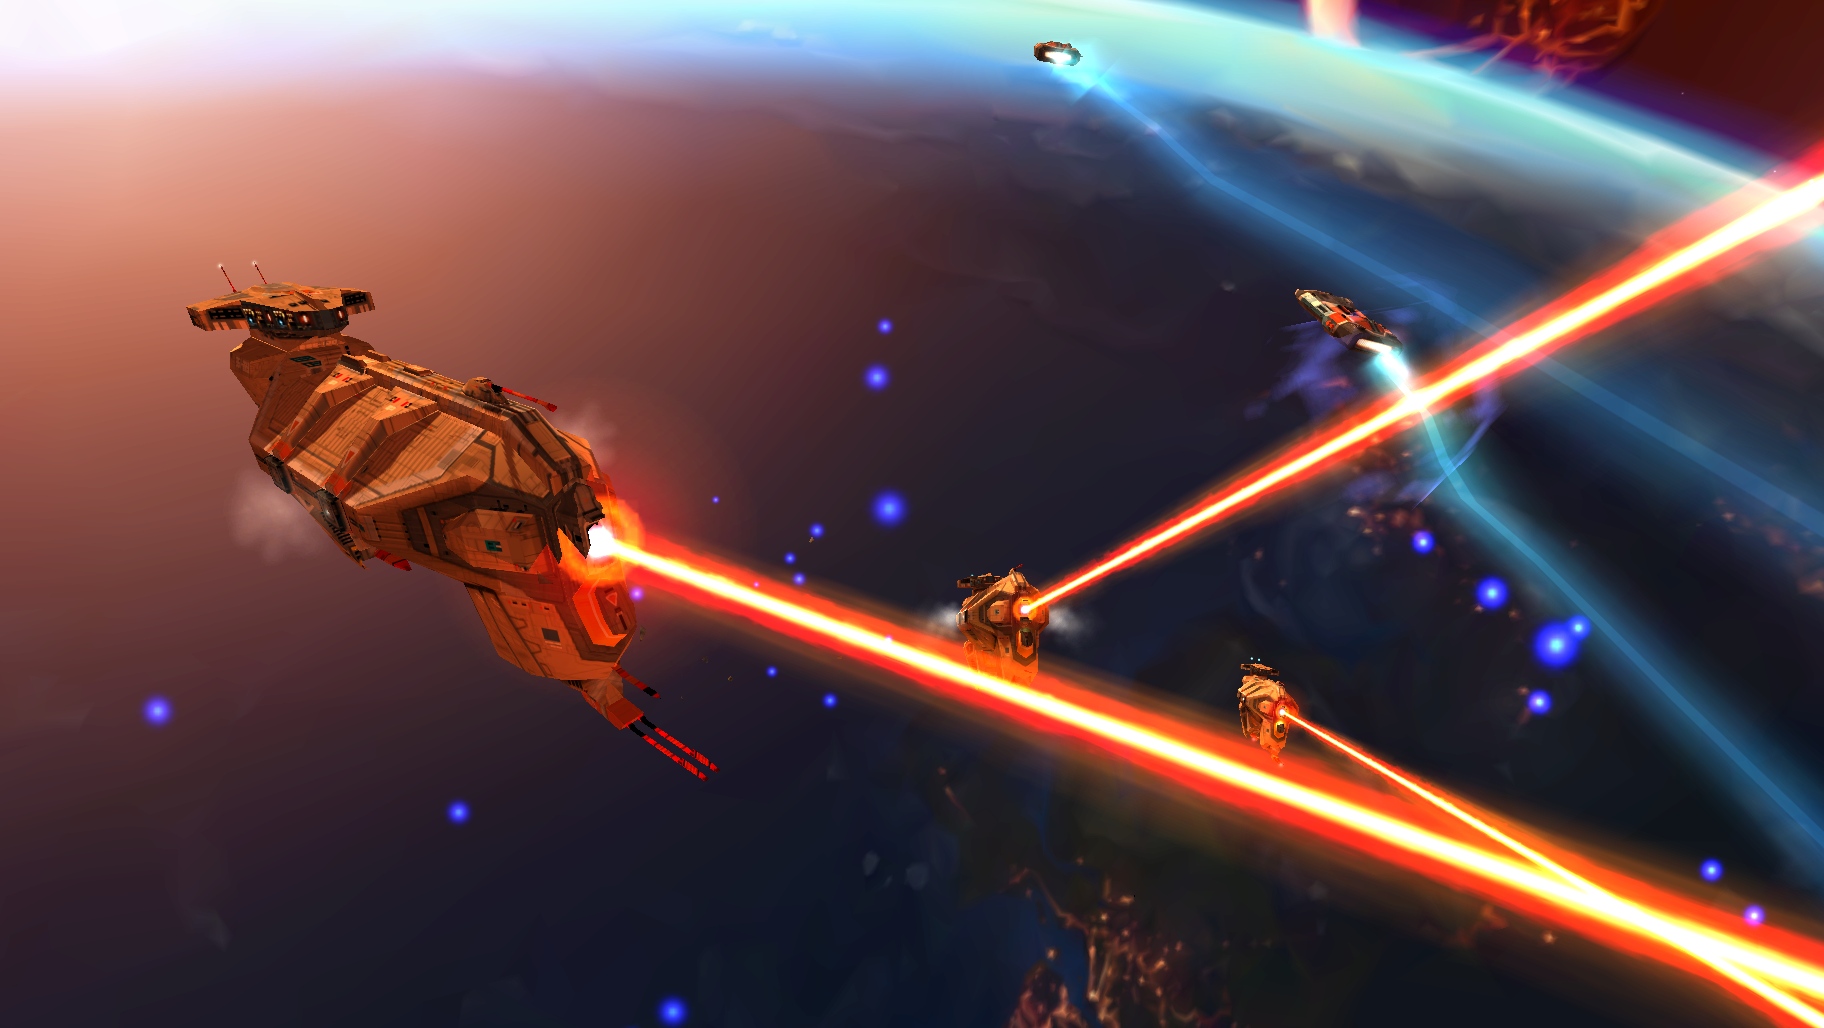 homeworld 2 remastered mods that keep campaign